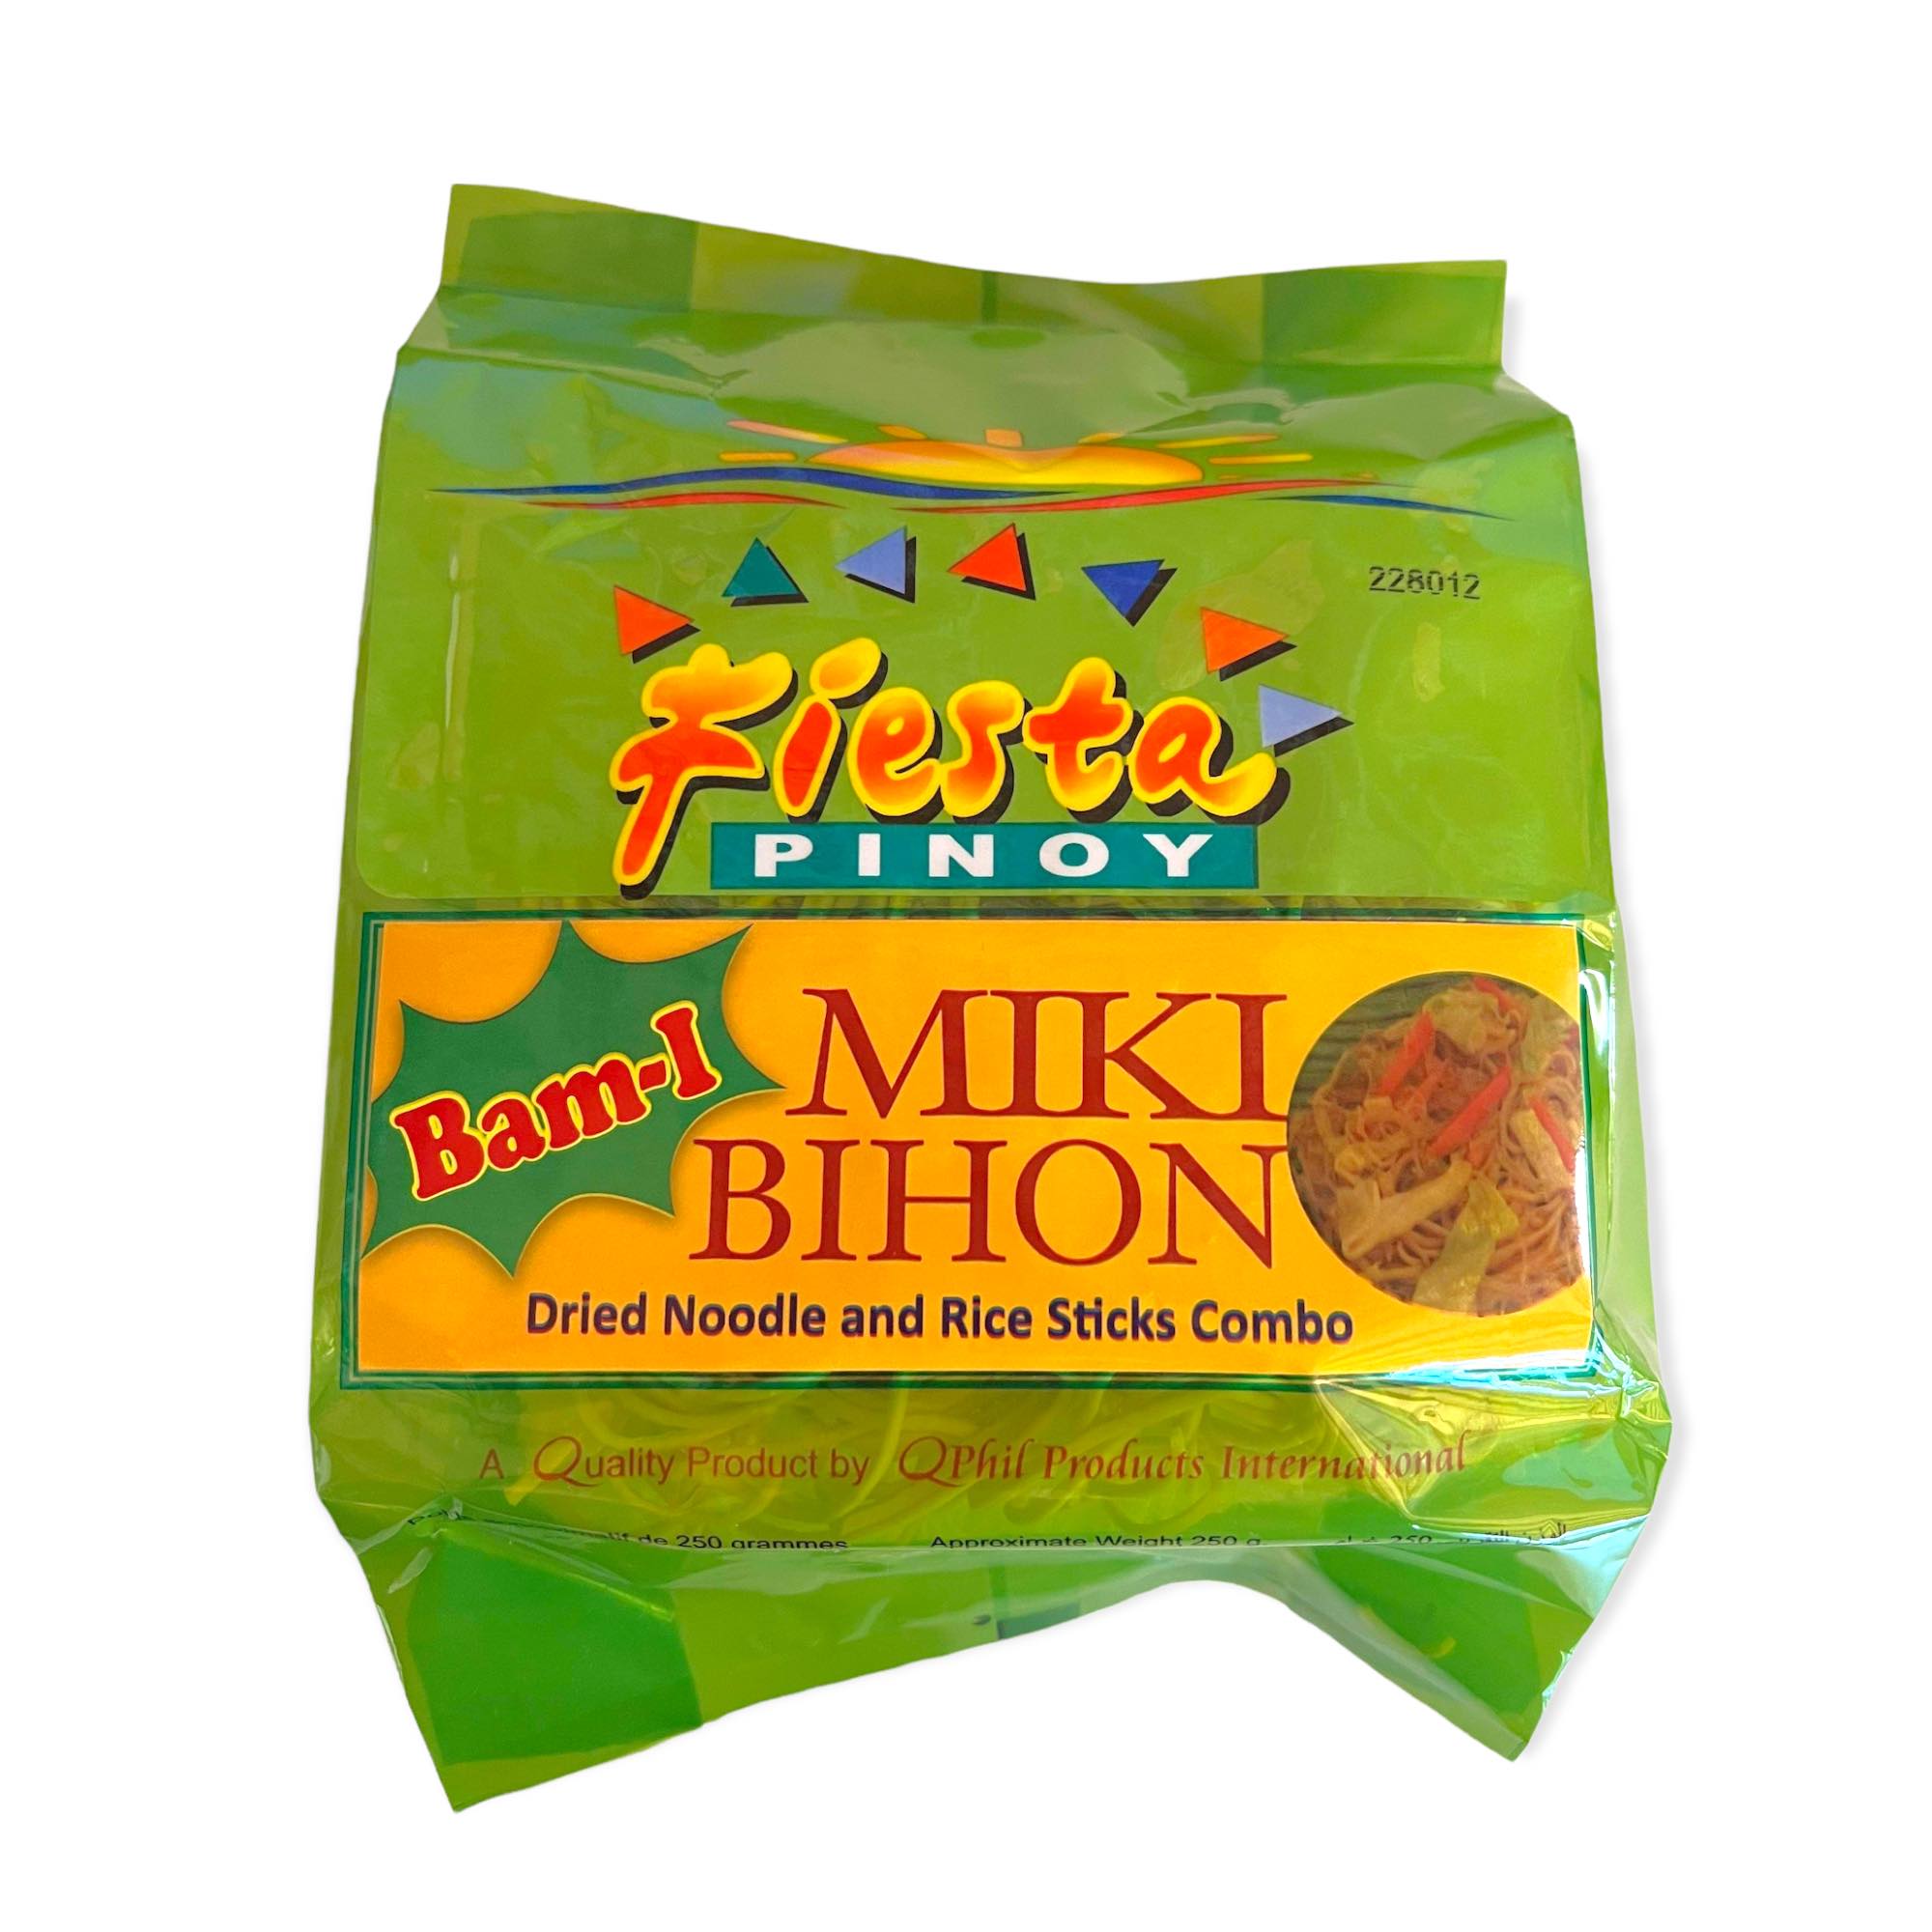 Fiesta Pinoy - Miki Bihon - Dried Noodle and Rice Sticks Combo - 250G